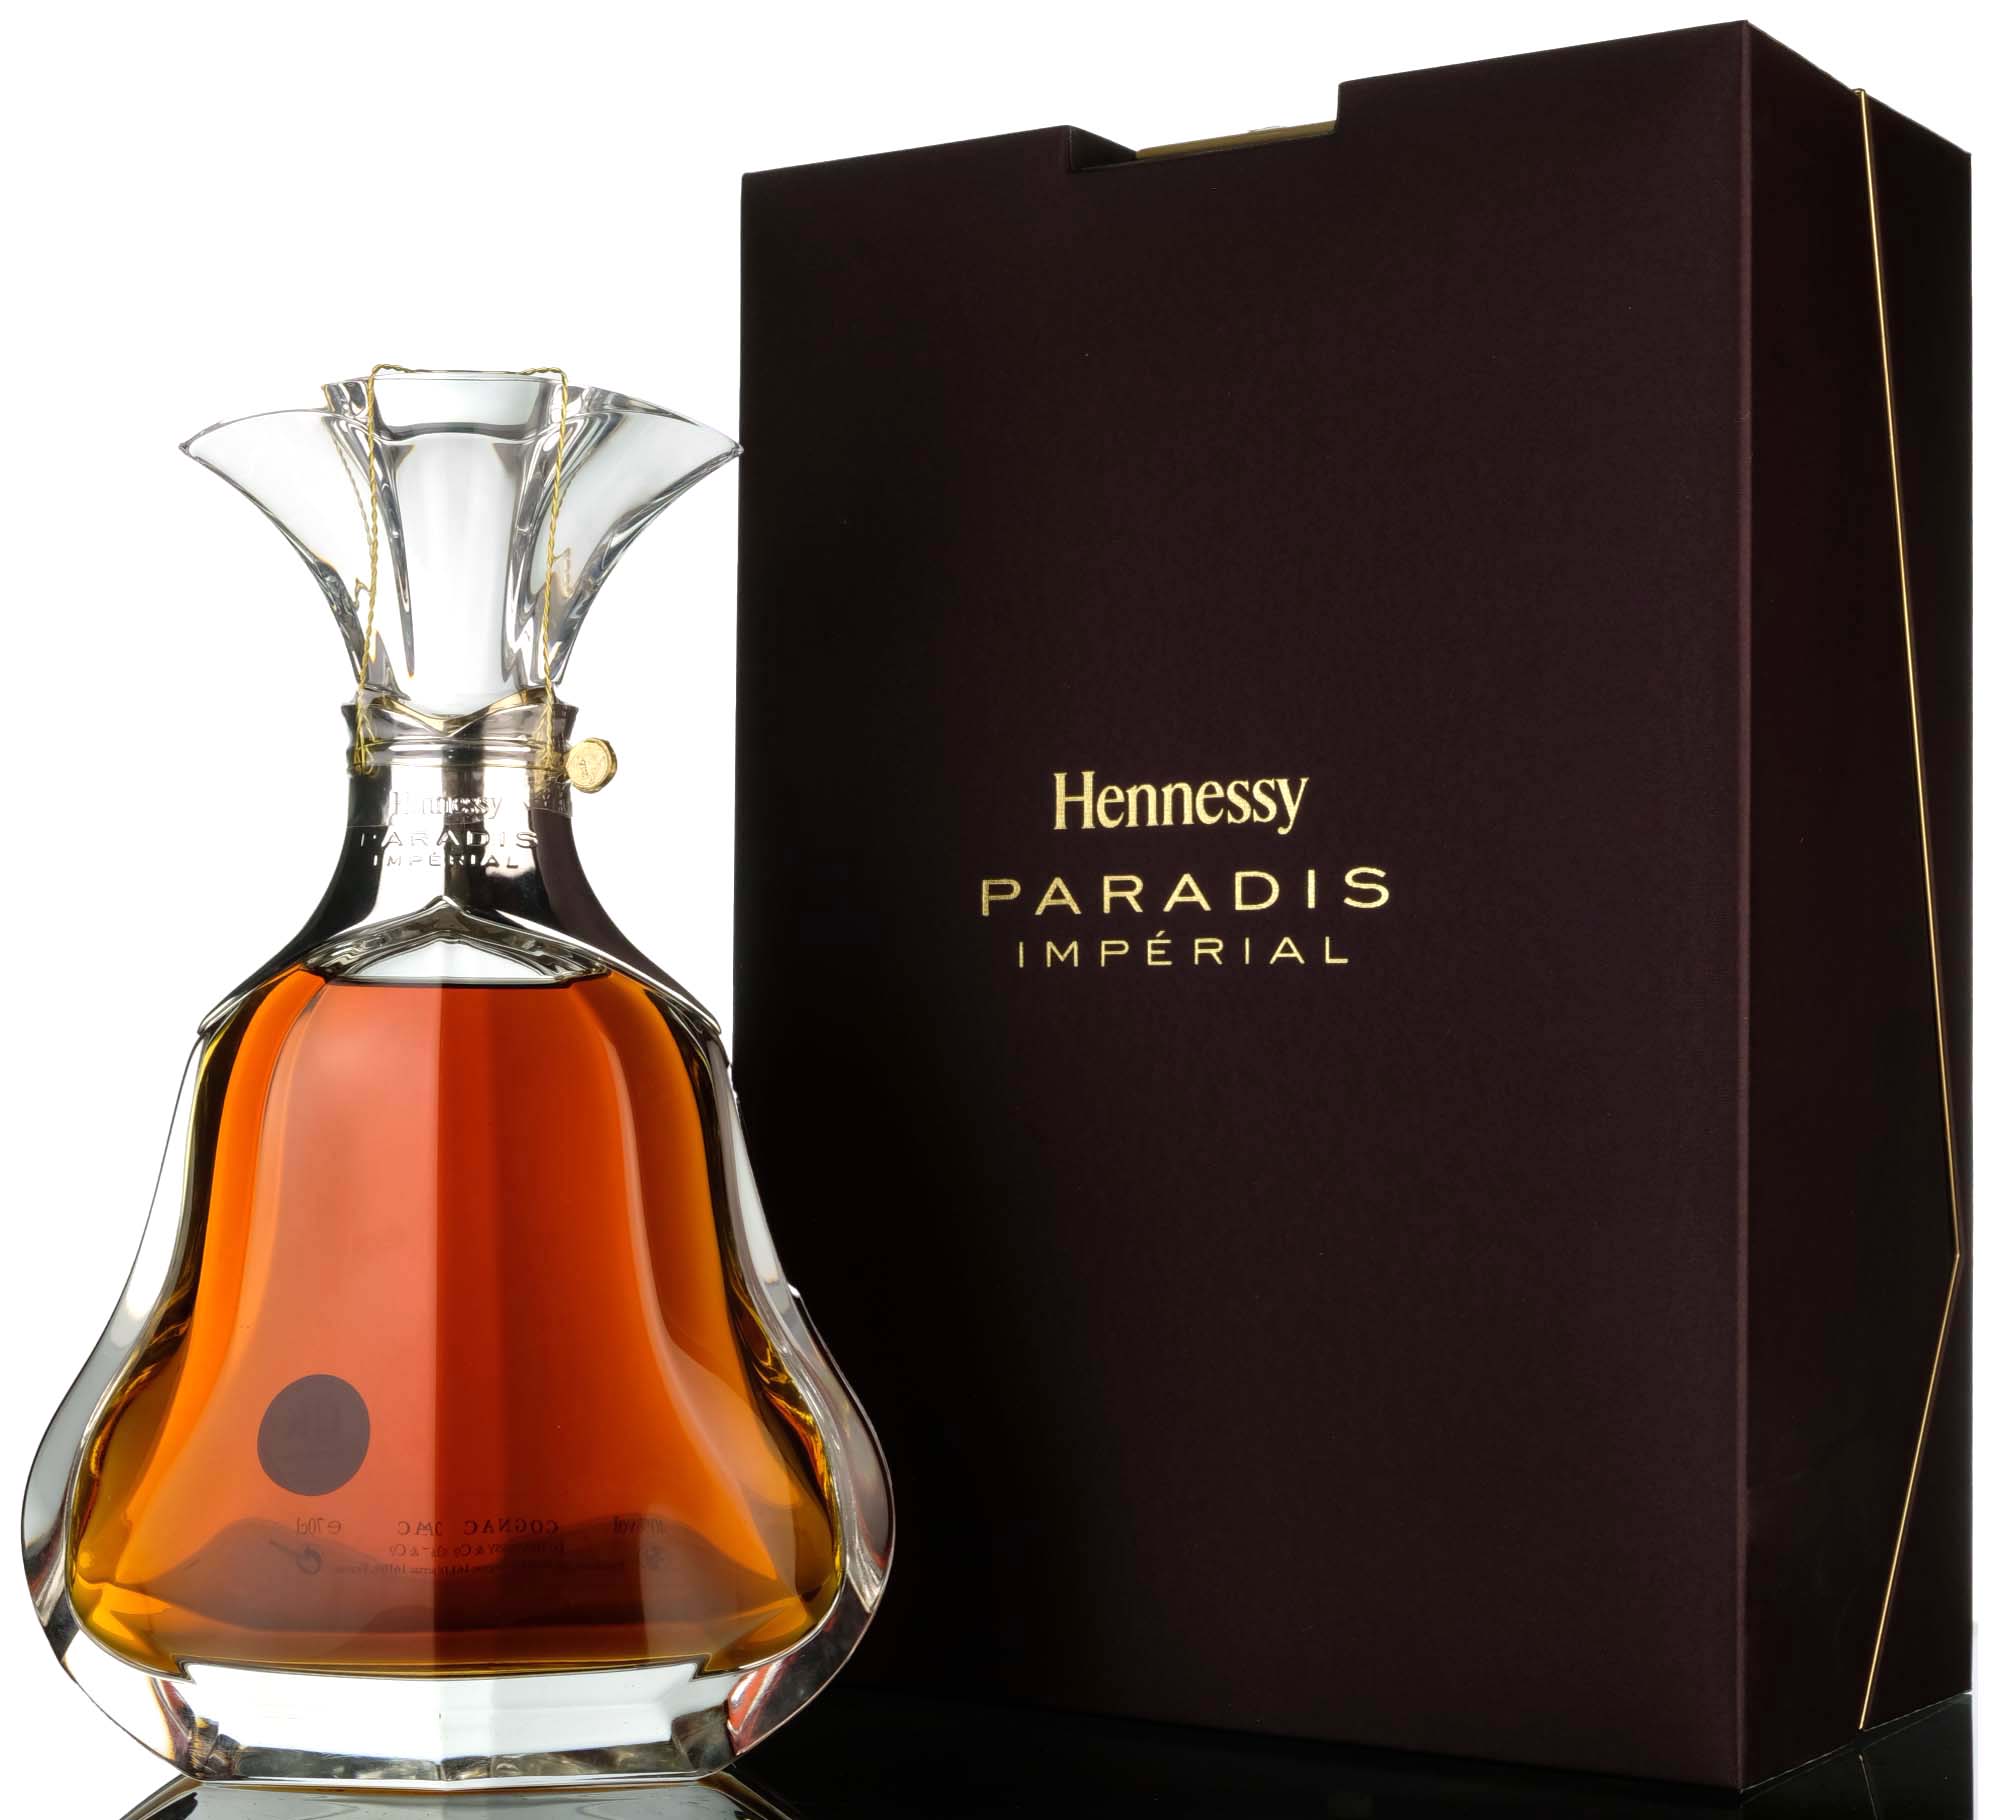 Hennessy Paradis Imperial Cognac - Crystal Decanter - 2017 Release